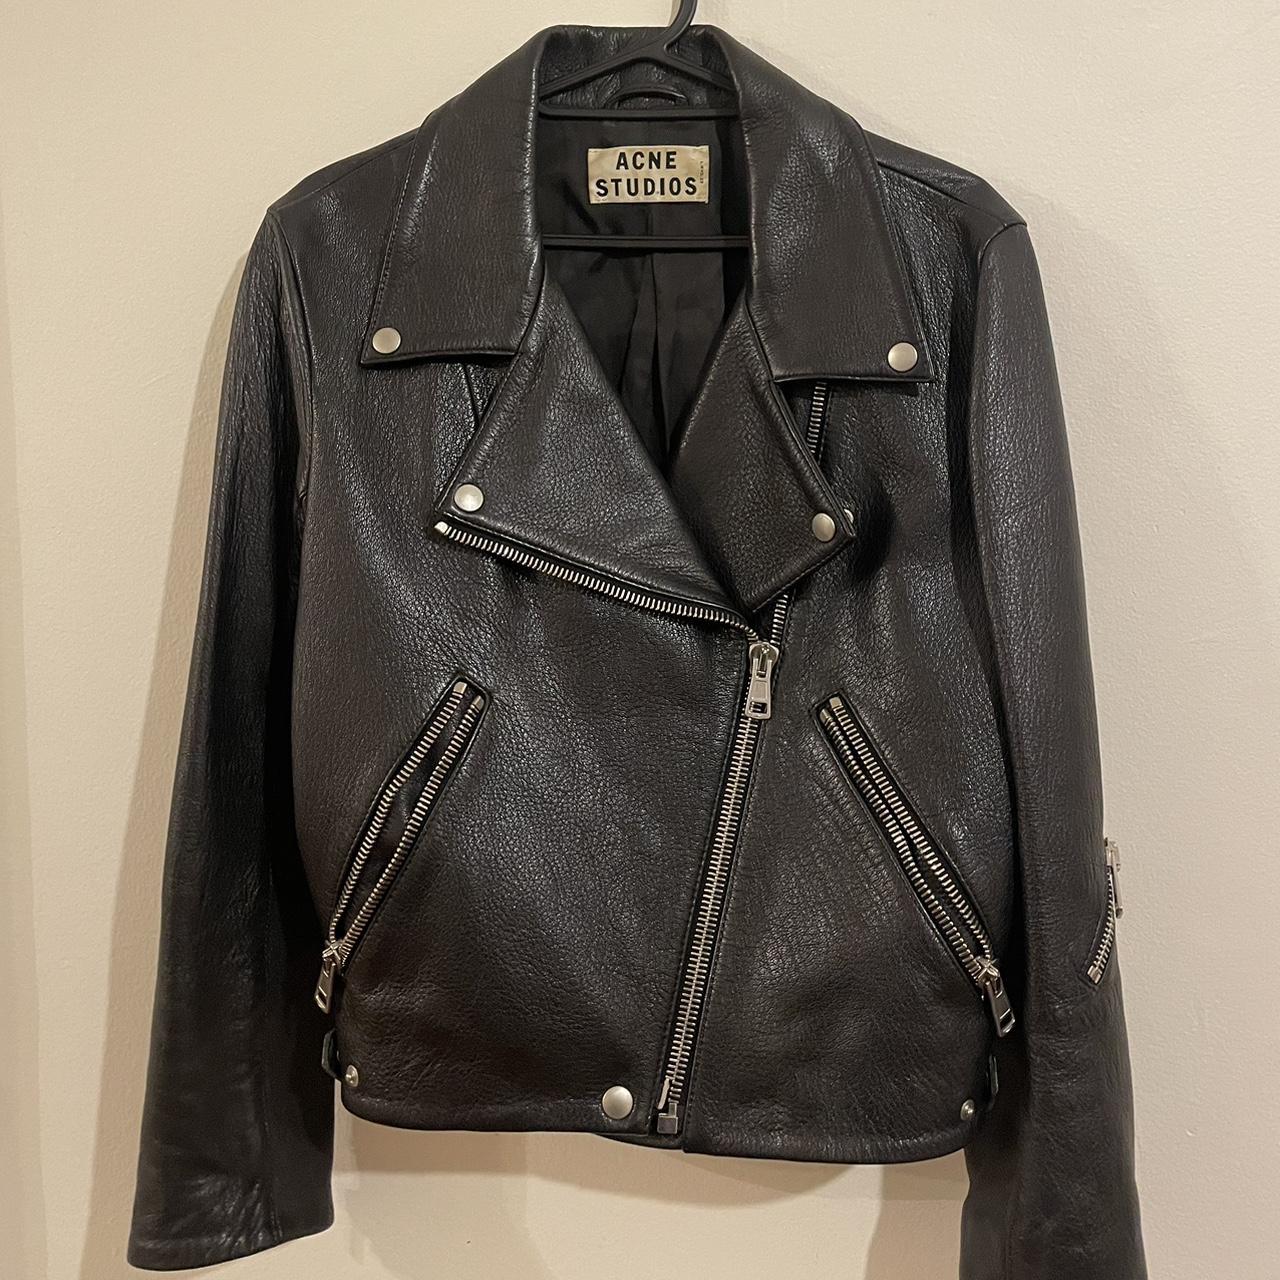 Acne studios leather jacket Size 10 I guess Very... - Depop